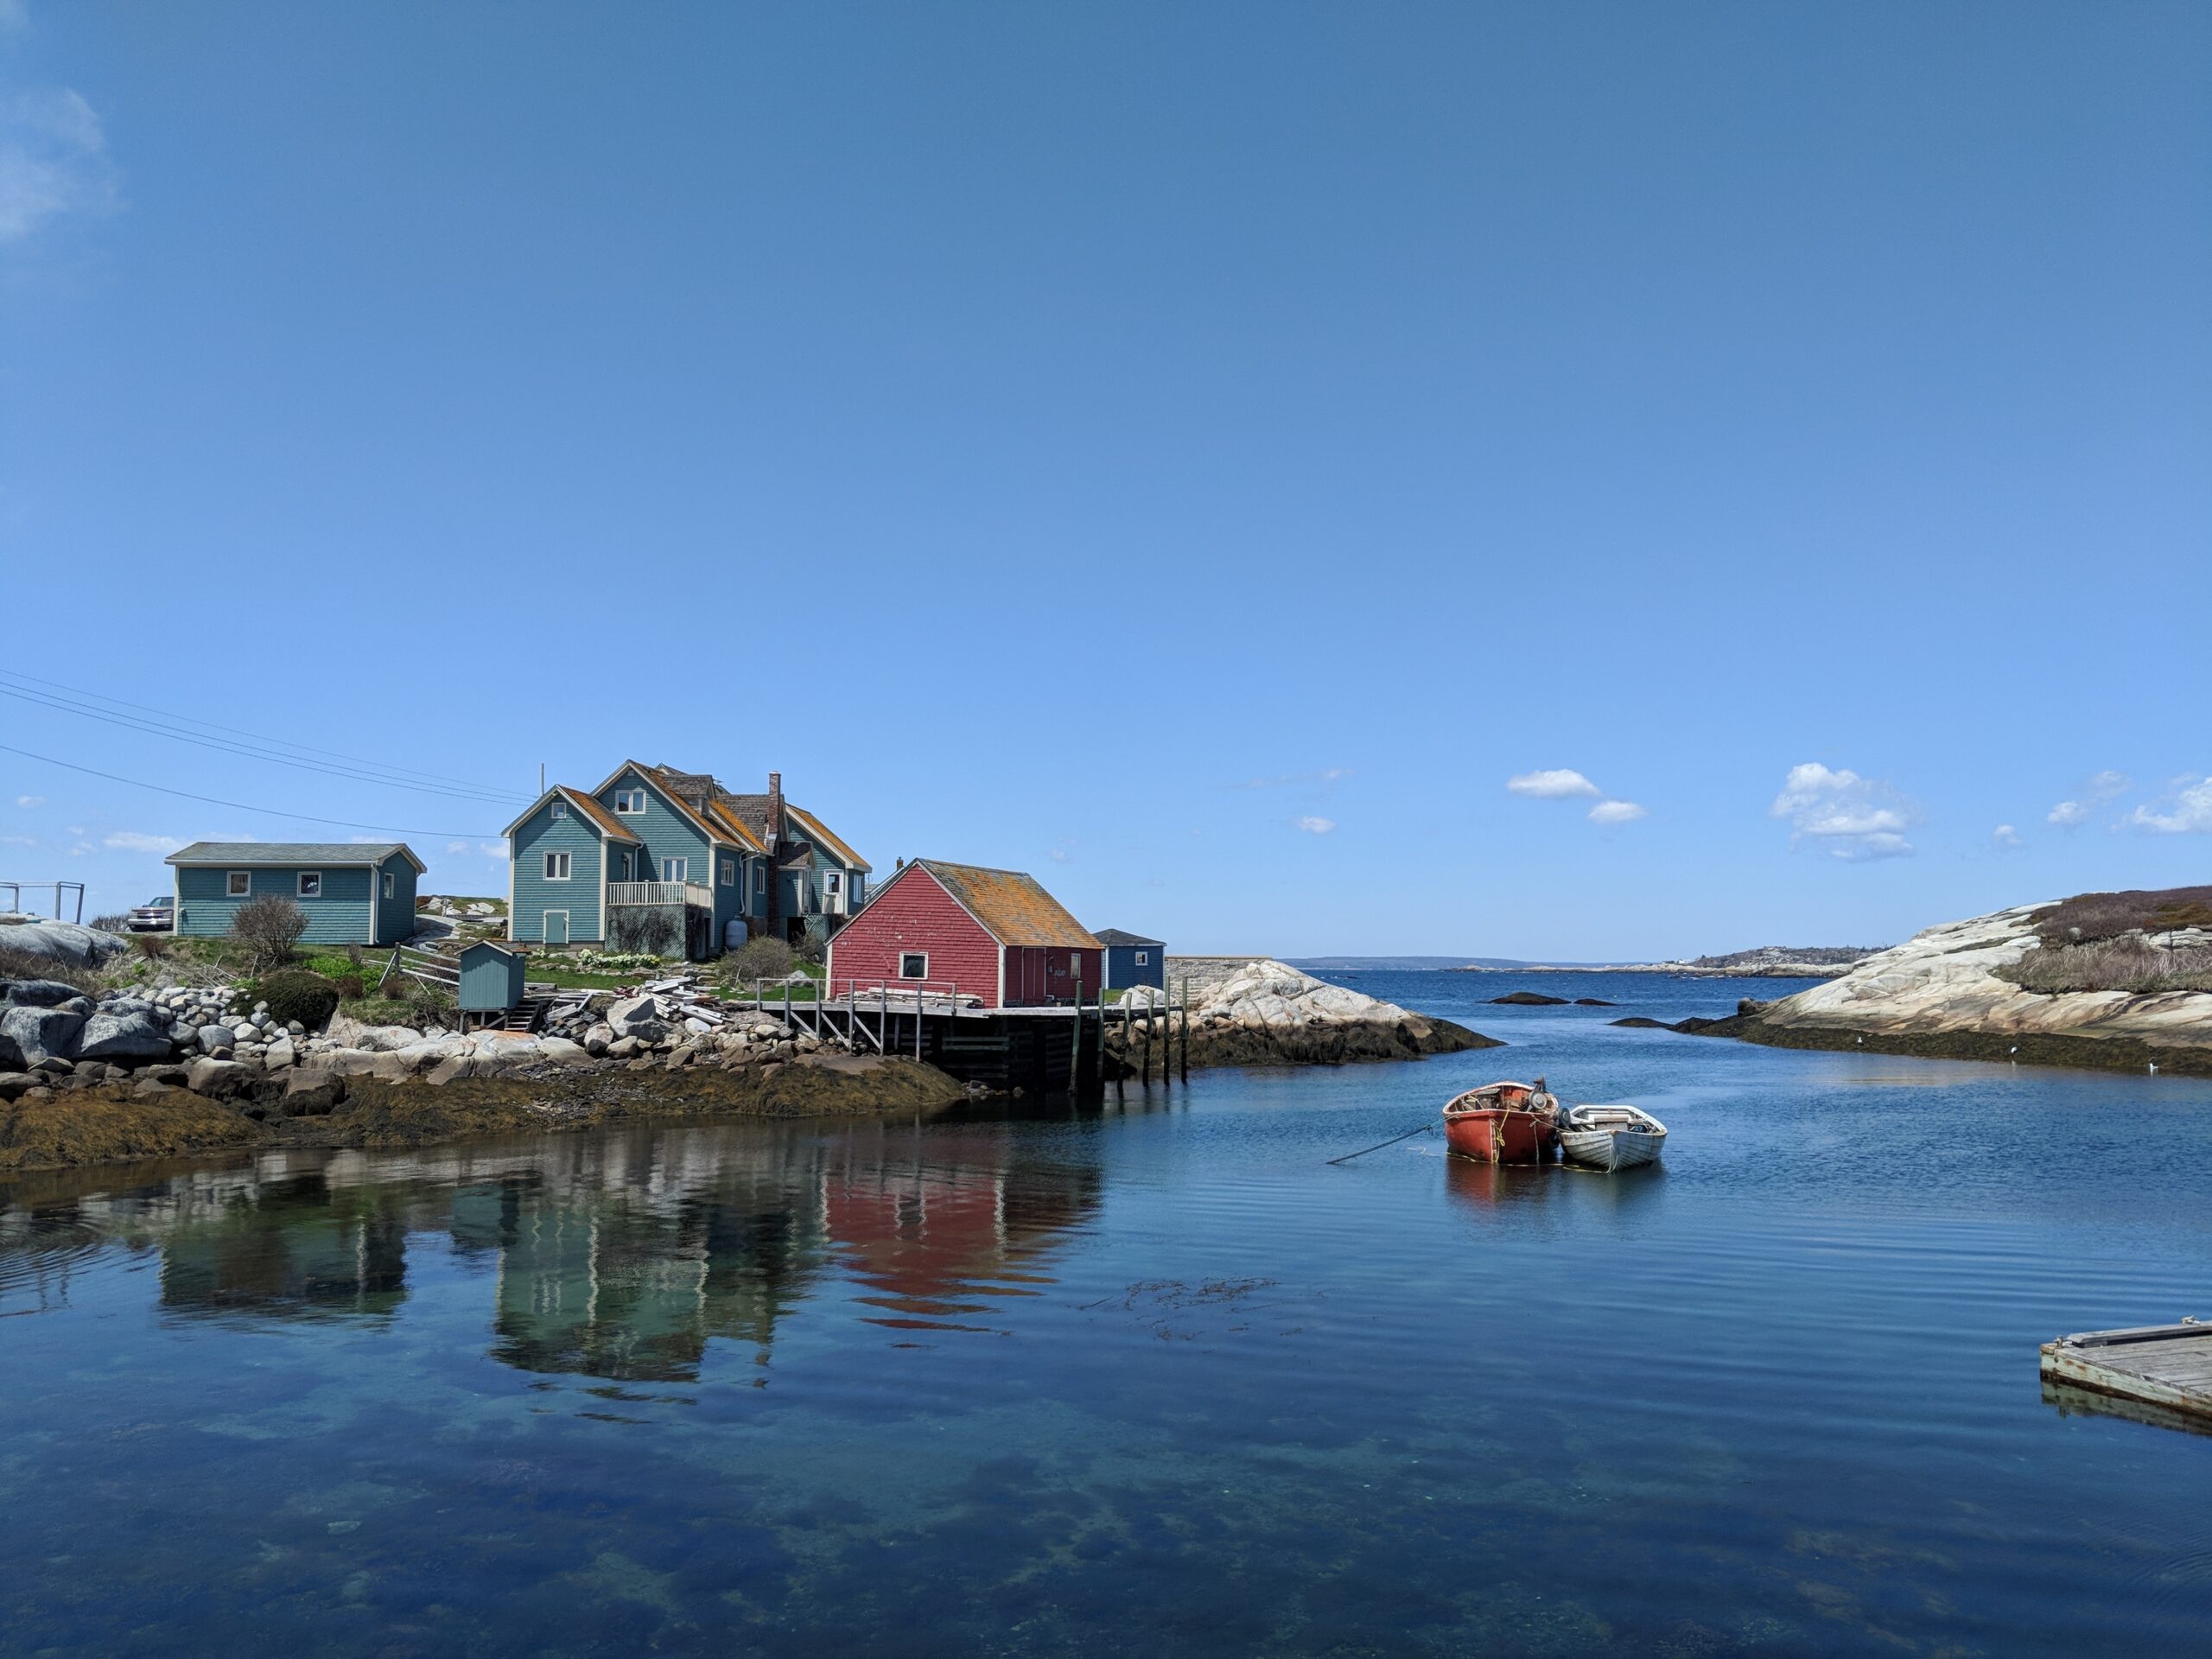 Nova Scotia water with houses on rocky area